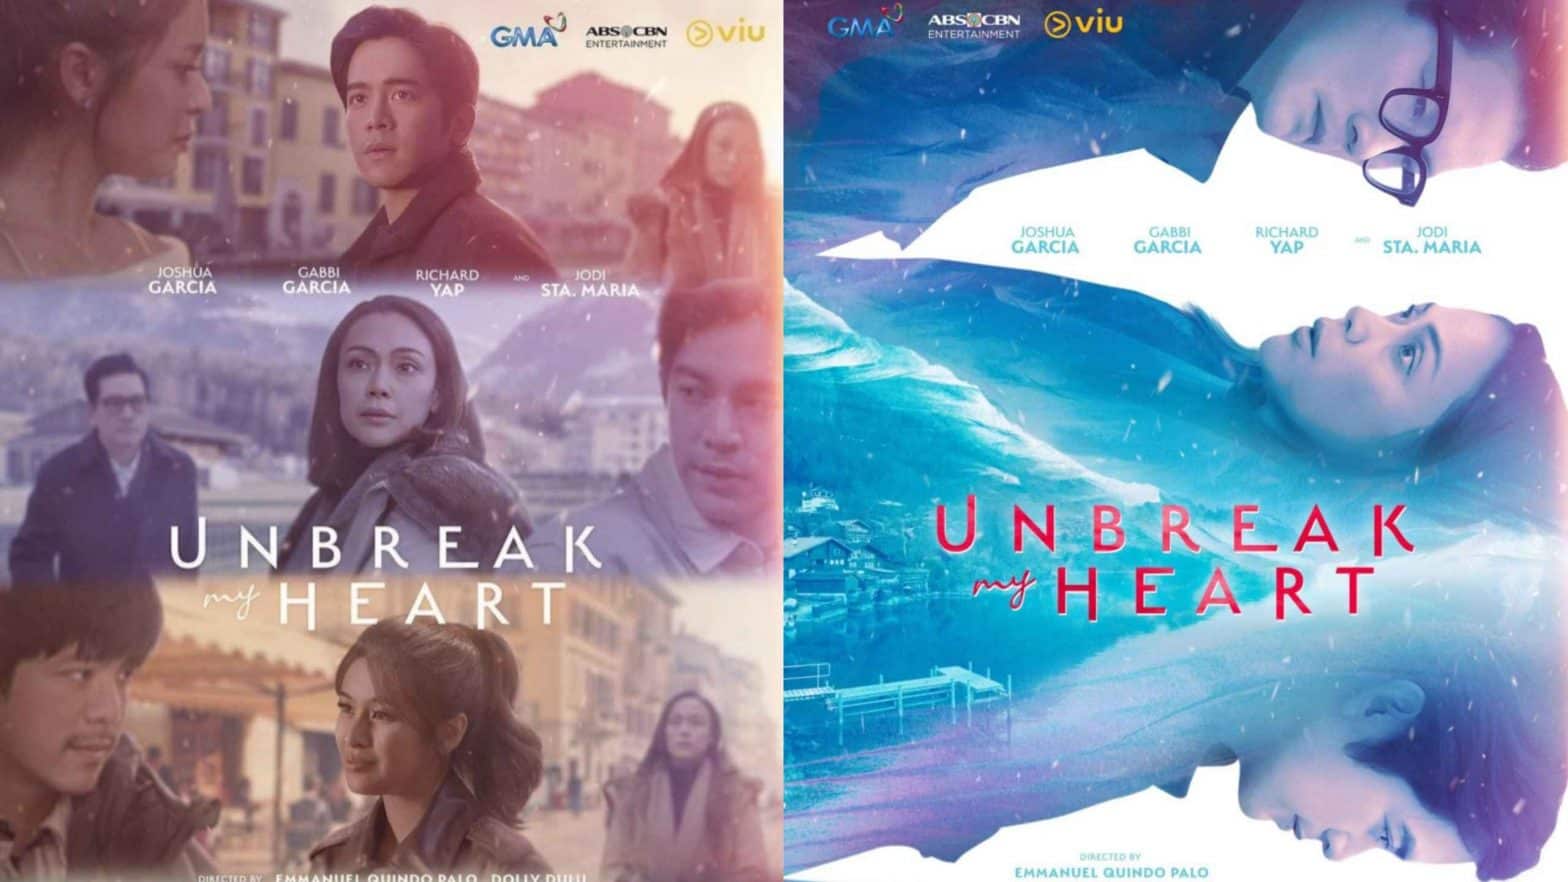 Unbreak My Heart Episode 14 Release Date, Preview & Streaming Guide